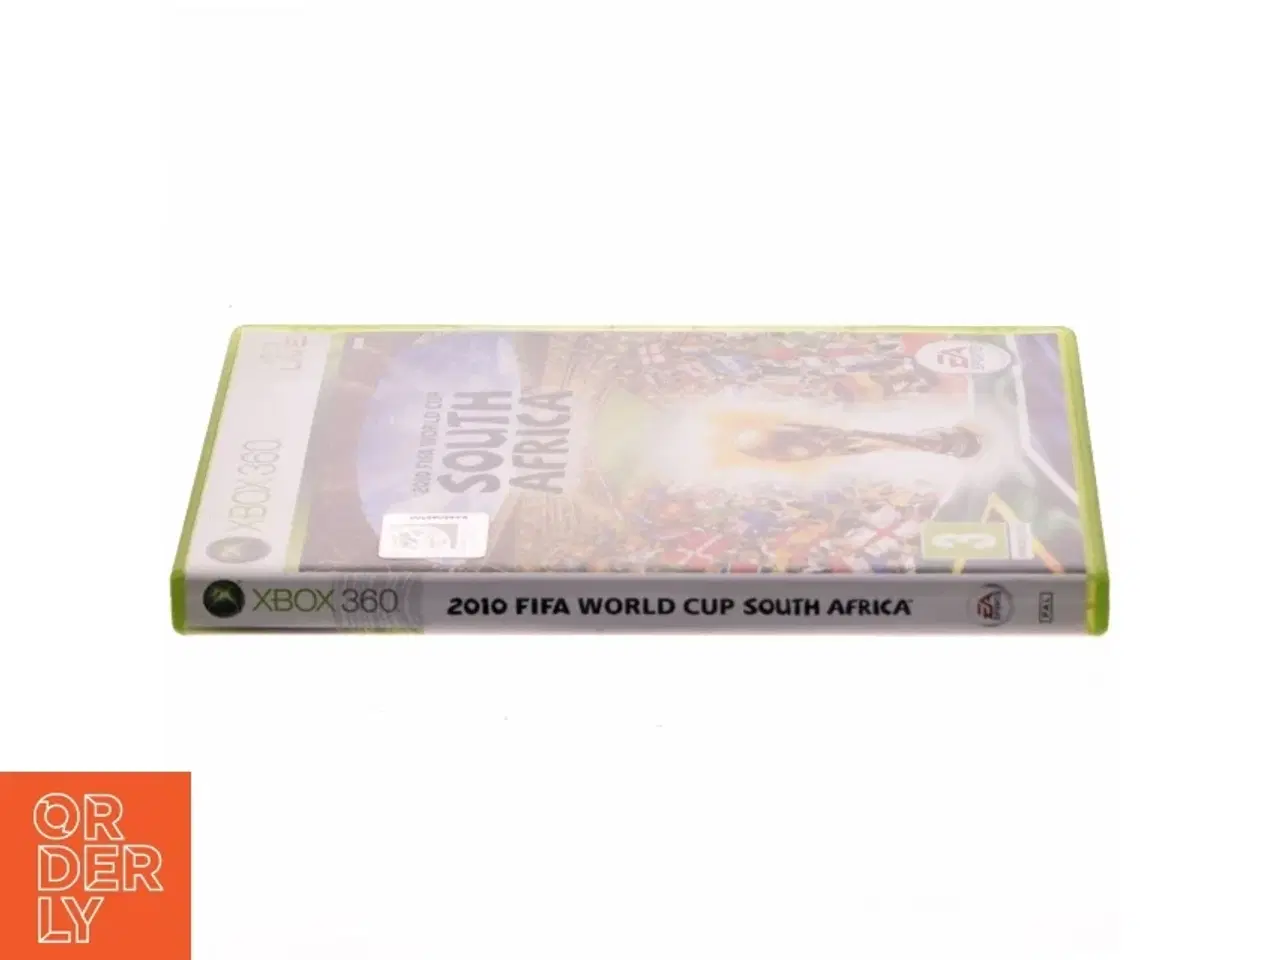 Billede 2 - 2010 FIFA World Cup South Africa Xbox 360 fra EA Sports